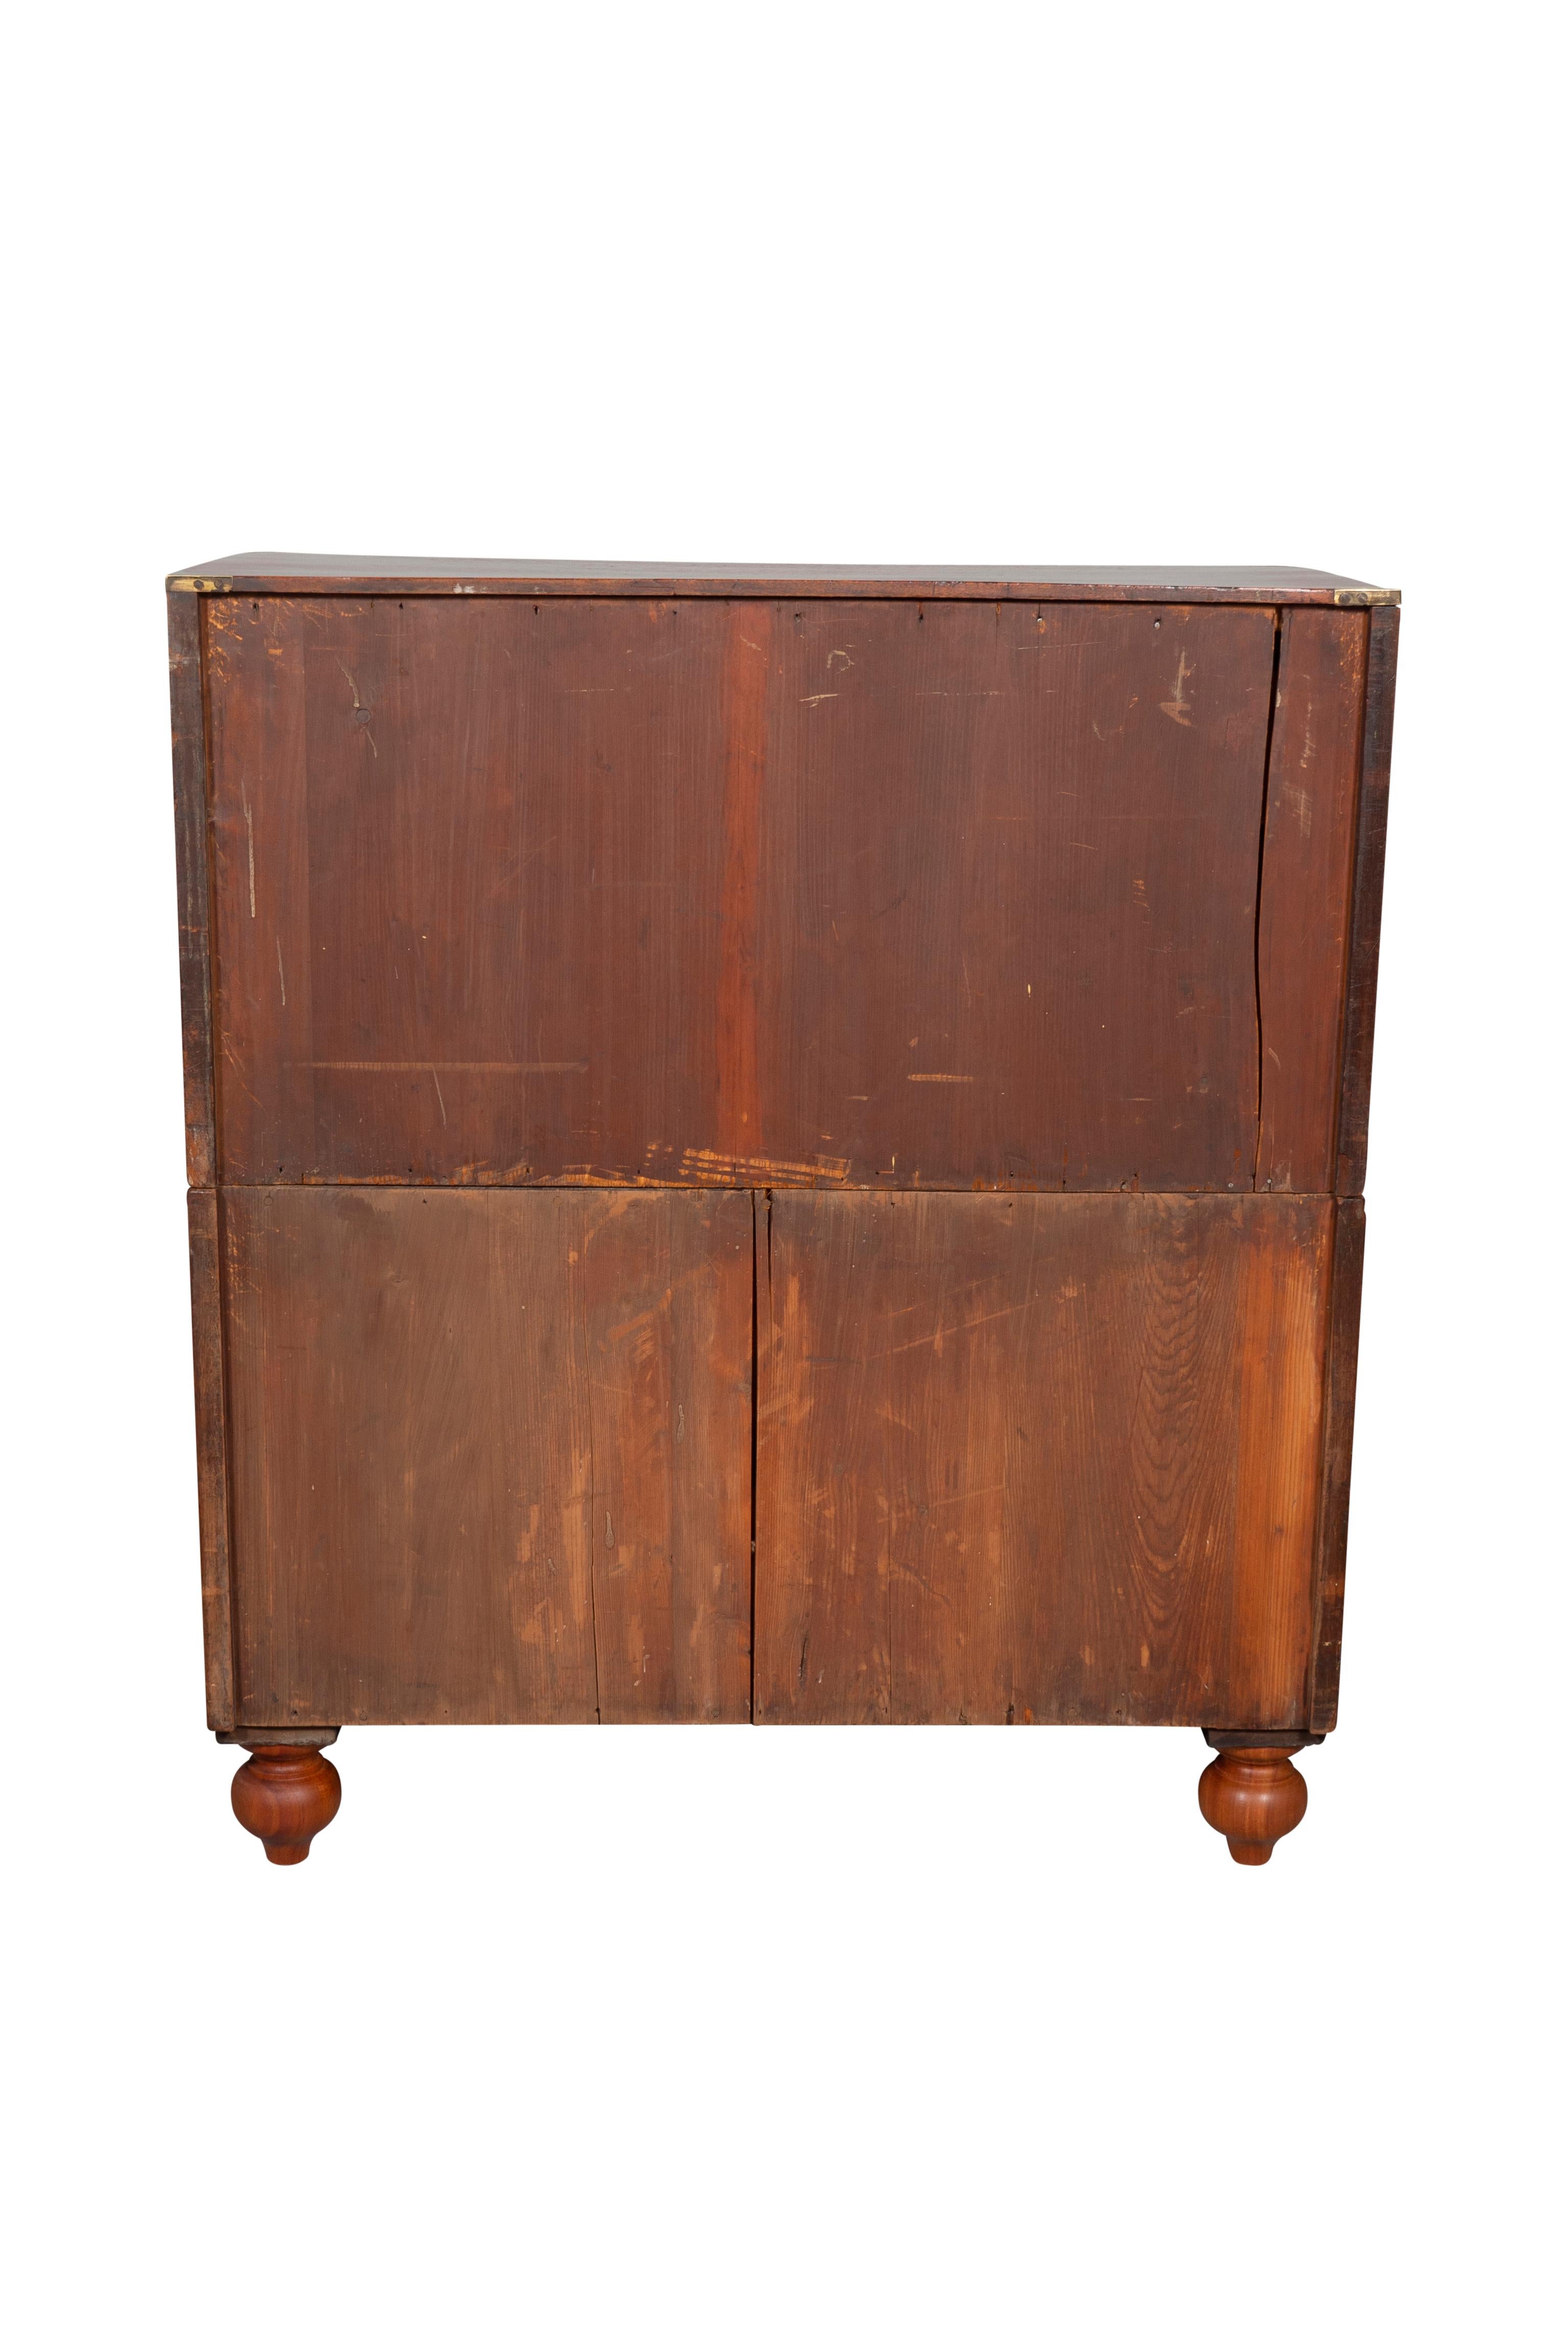 Mid-19th Century Victorian Mahogany and Brass Bound Campaign Chest For Sale